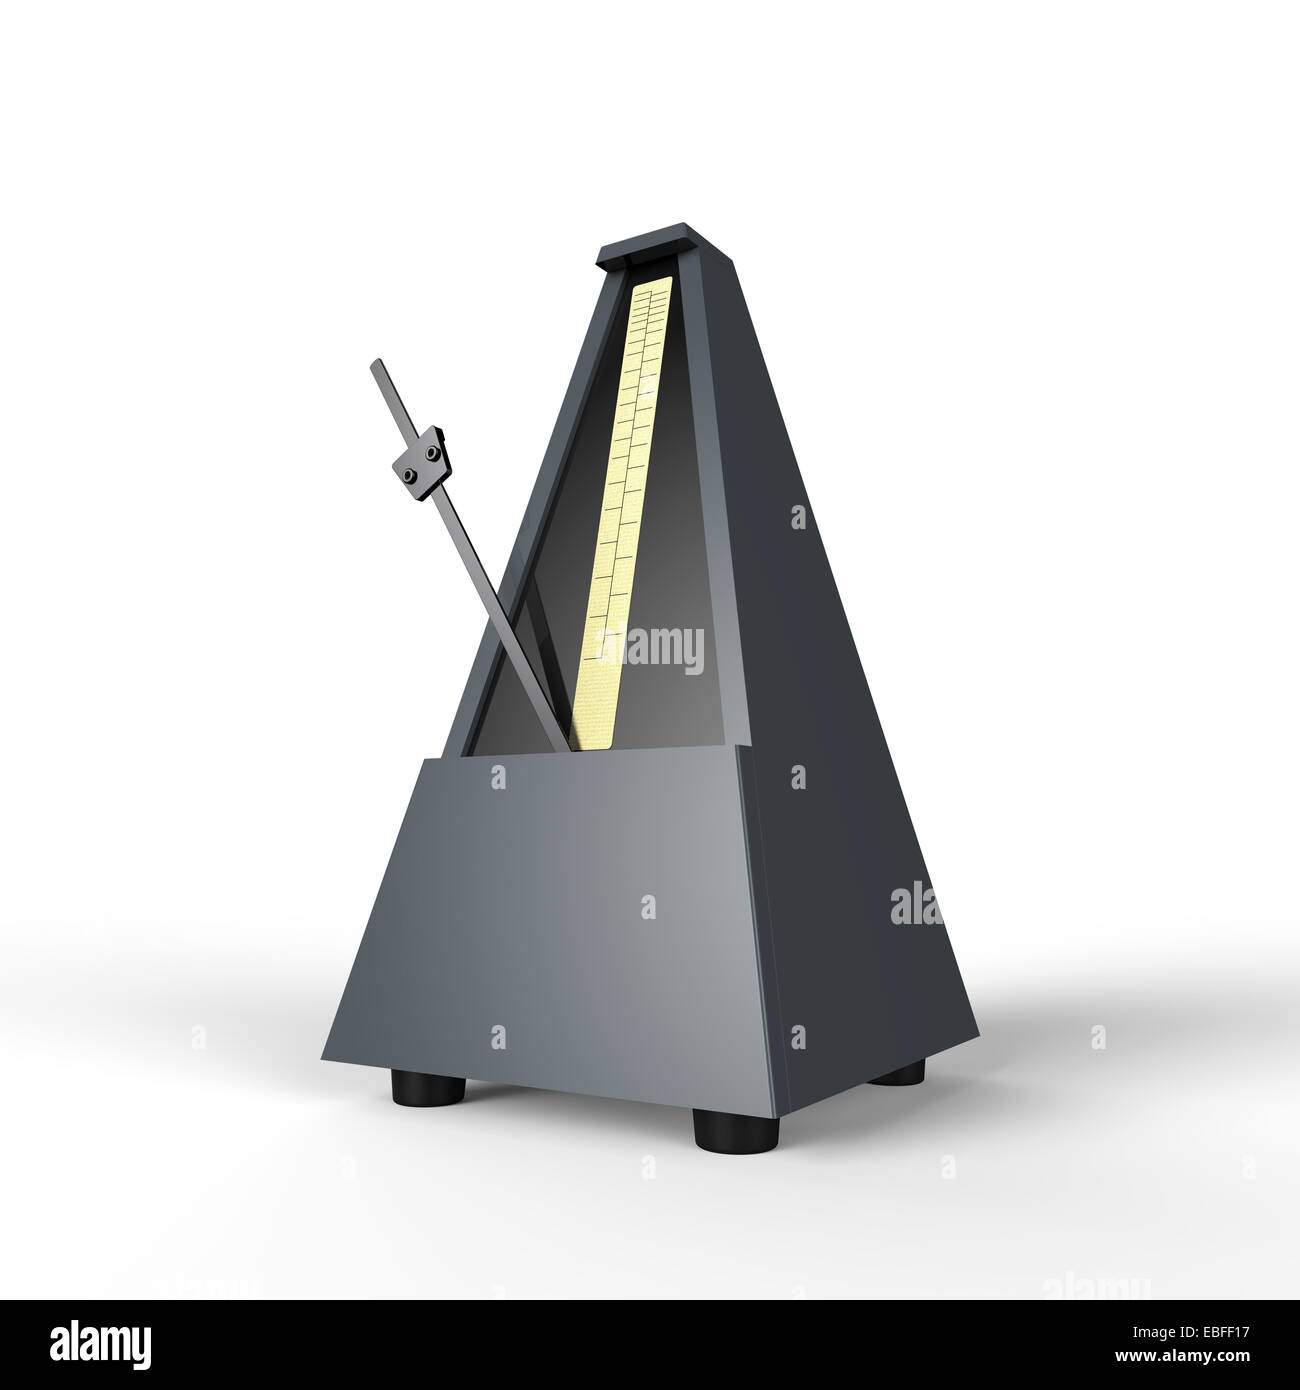 grey pyramid shaped wooden metronome on a white background used for music practice to keep the rhythm Stock Photo